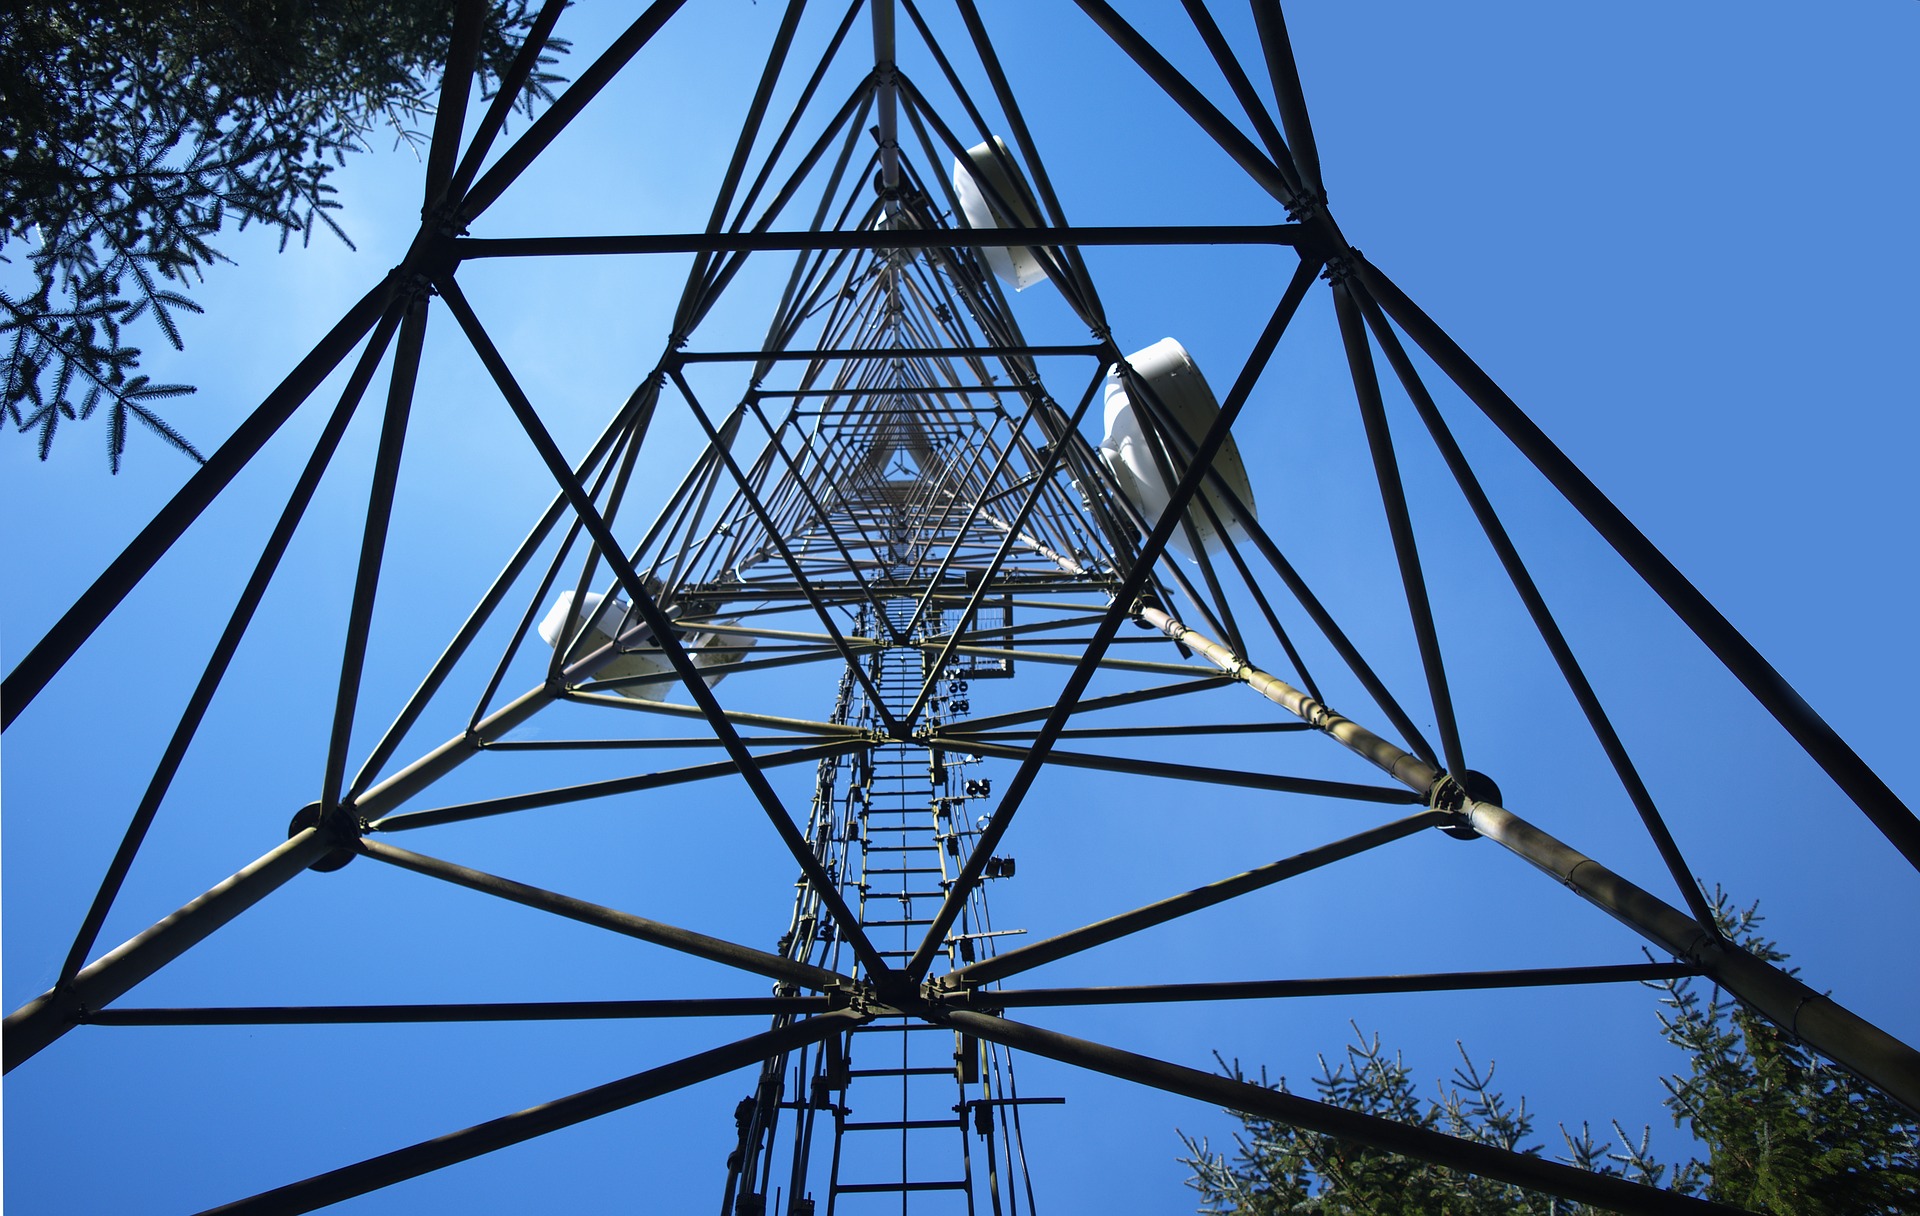 cell-tower-2252153_1920